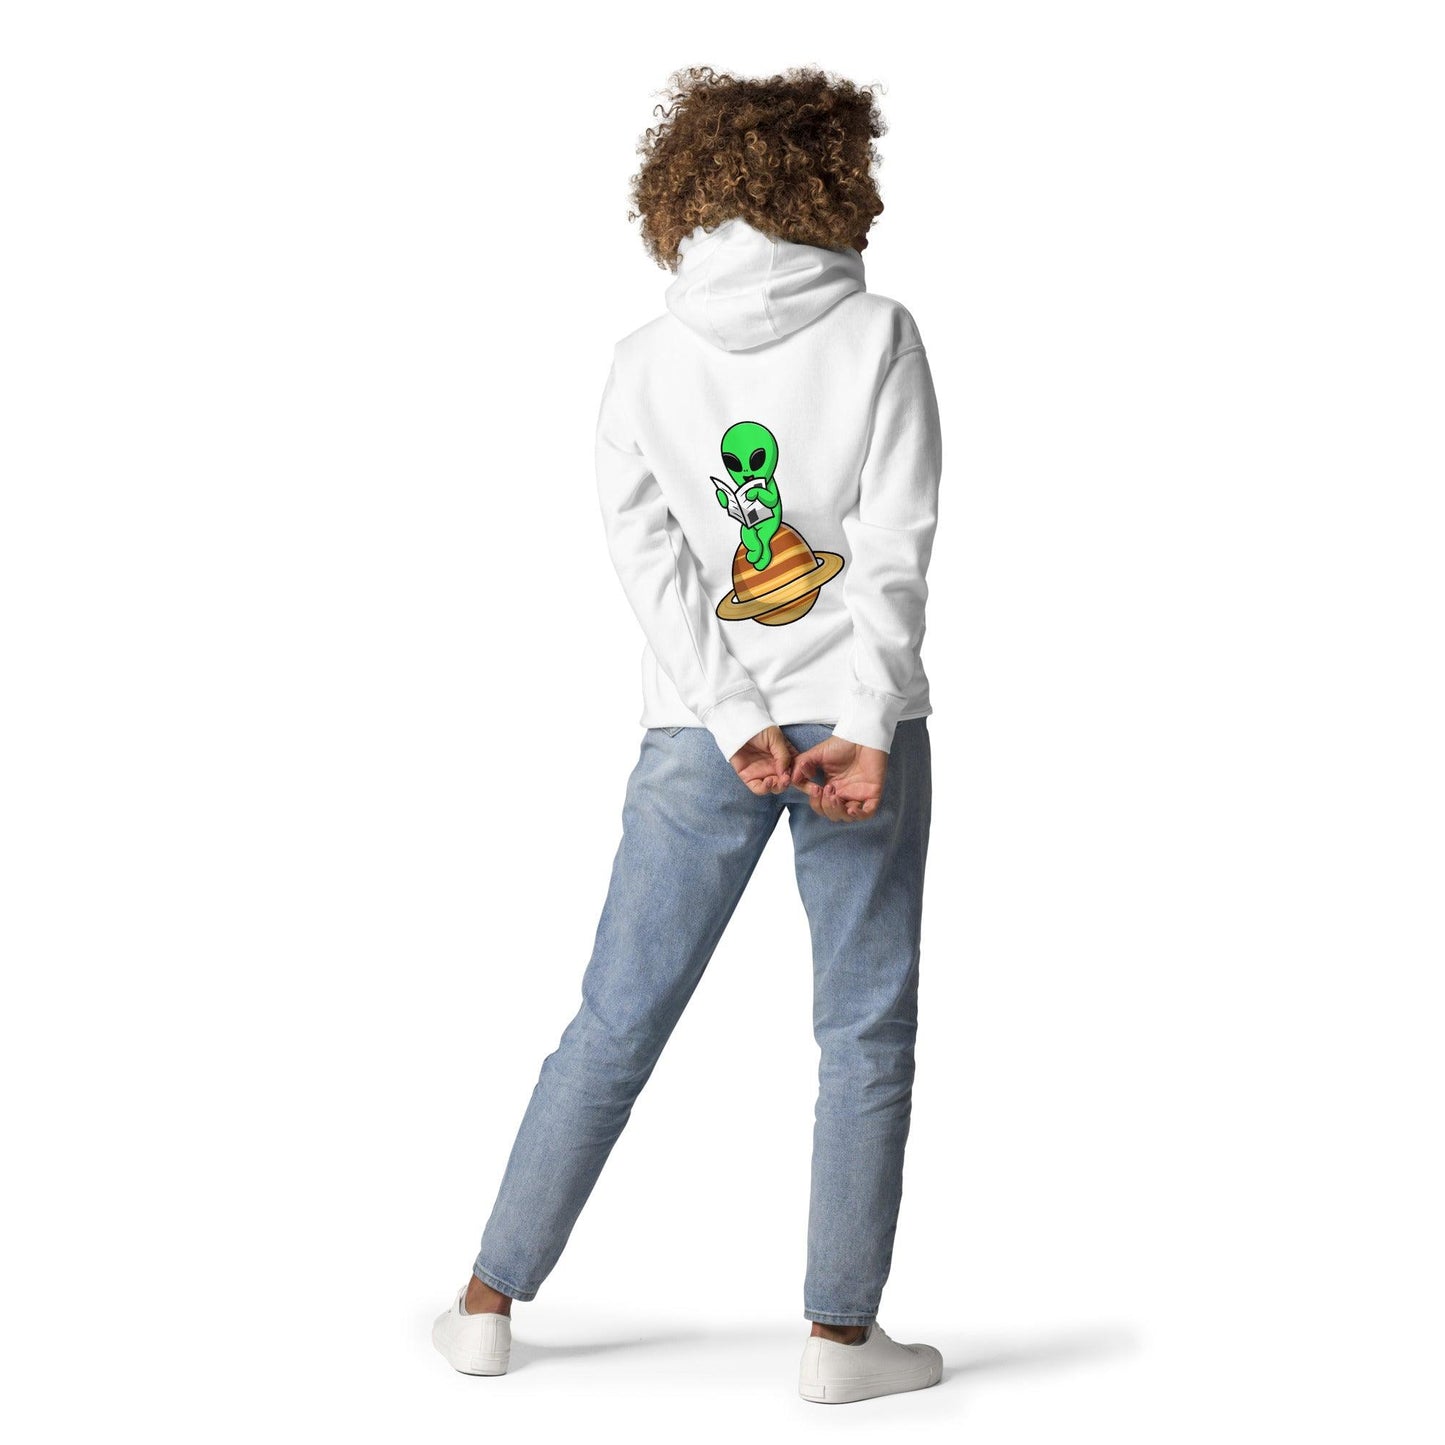 Craig's Crafting Co | Be Kind To Your Mind Unisex Hoodie - Craig’s Crafting Co.